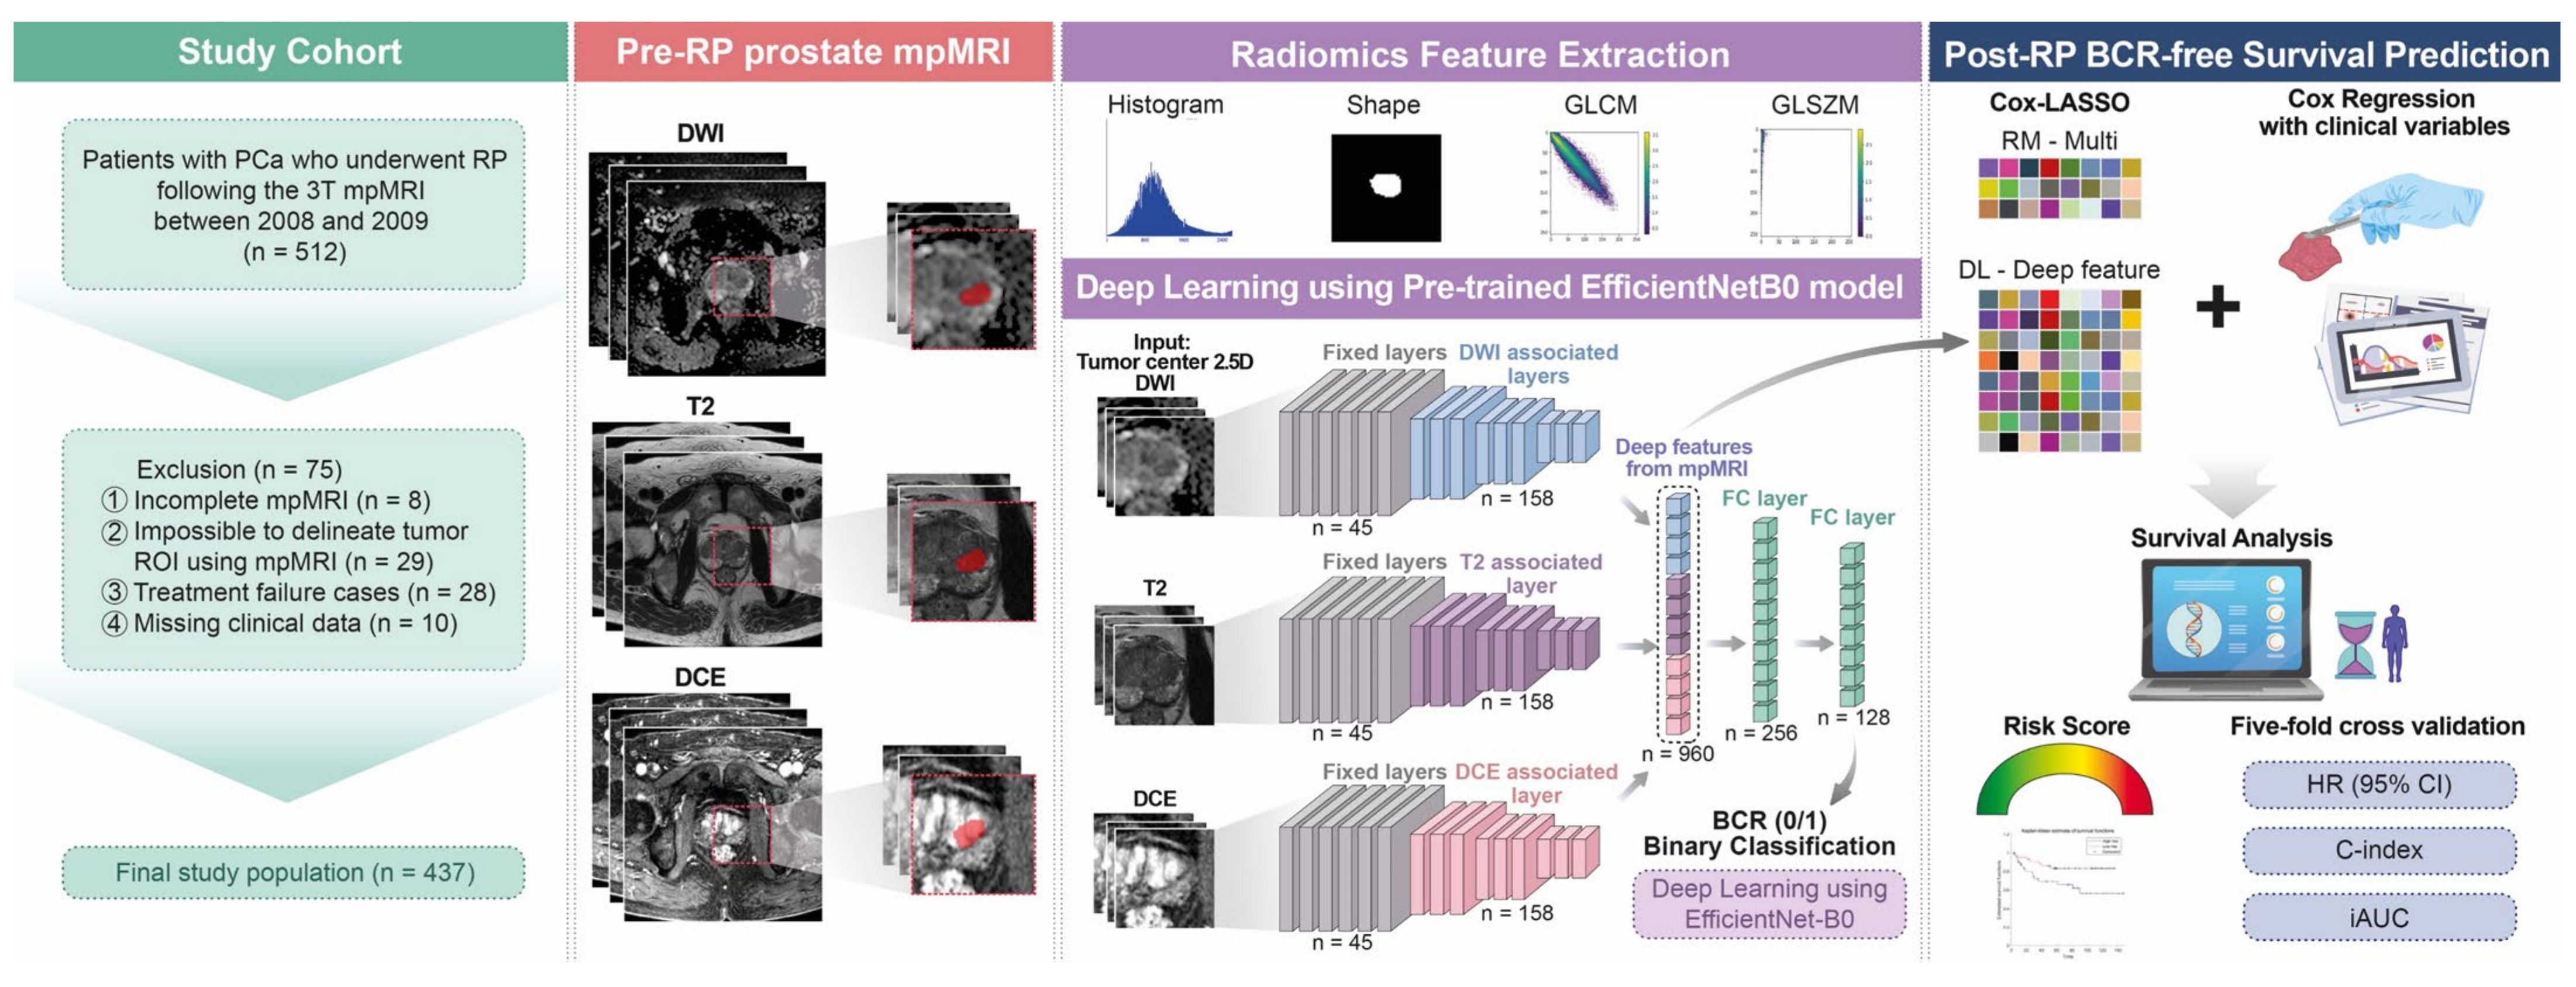 Novel multi-parametric magnetic resonance imaging-based deep learning and clinical parameter integration for the prediction of long- term biochemical recurrence-free survival in prostate cancer after radical prostatectomy 이미지